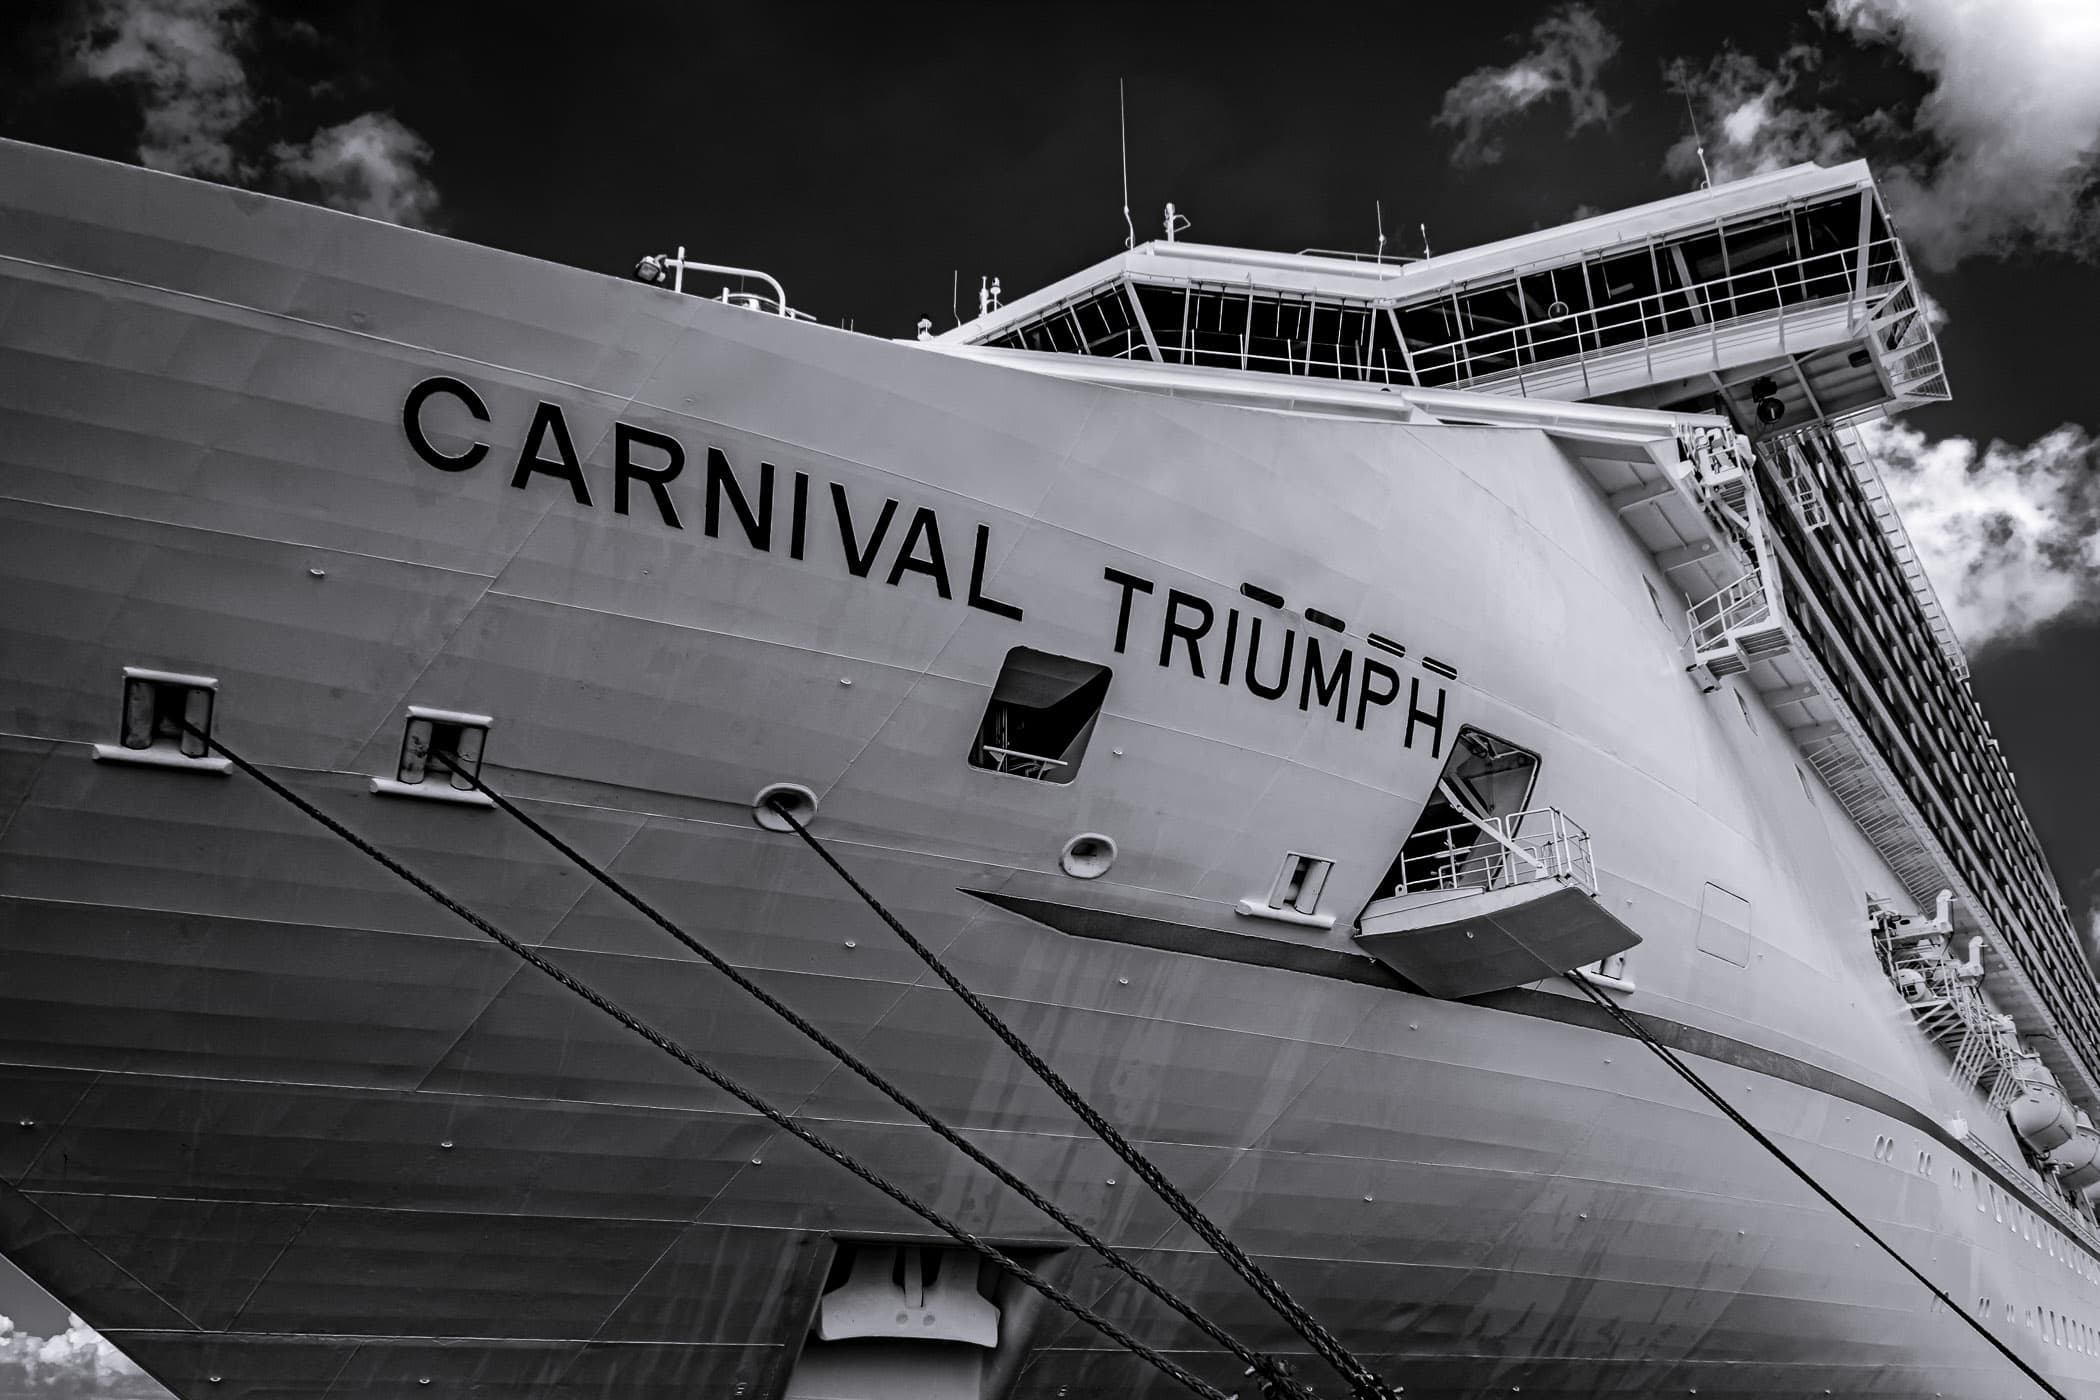 The cruise ship Carnival Triumph, docked in Cozumel, Mexico.